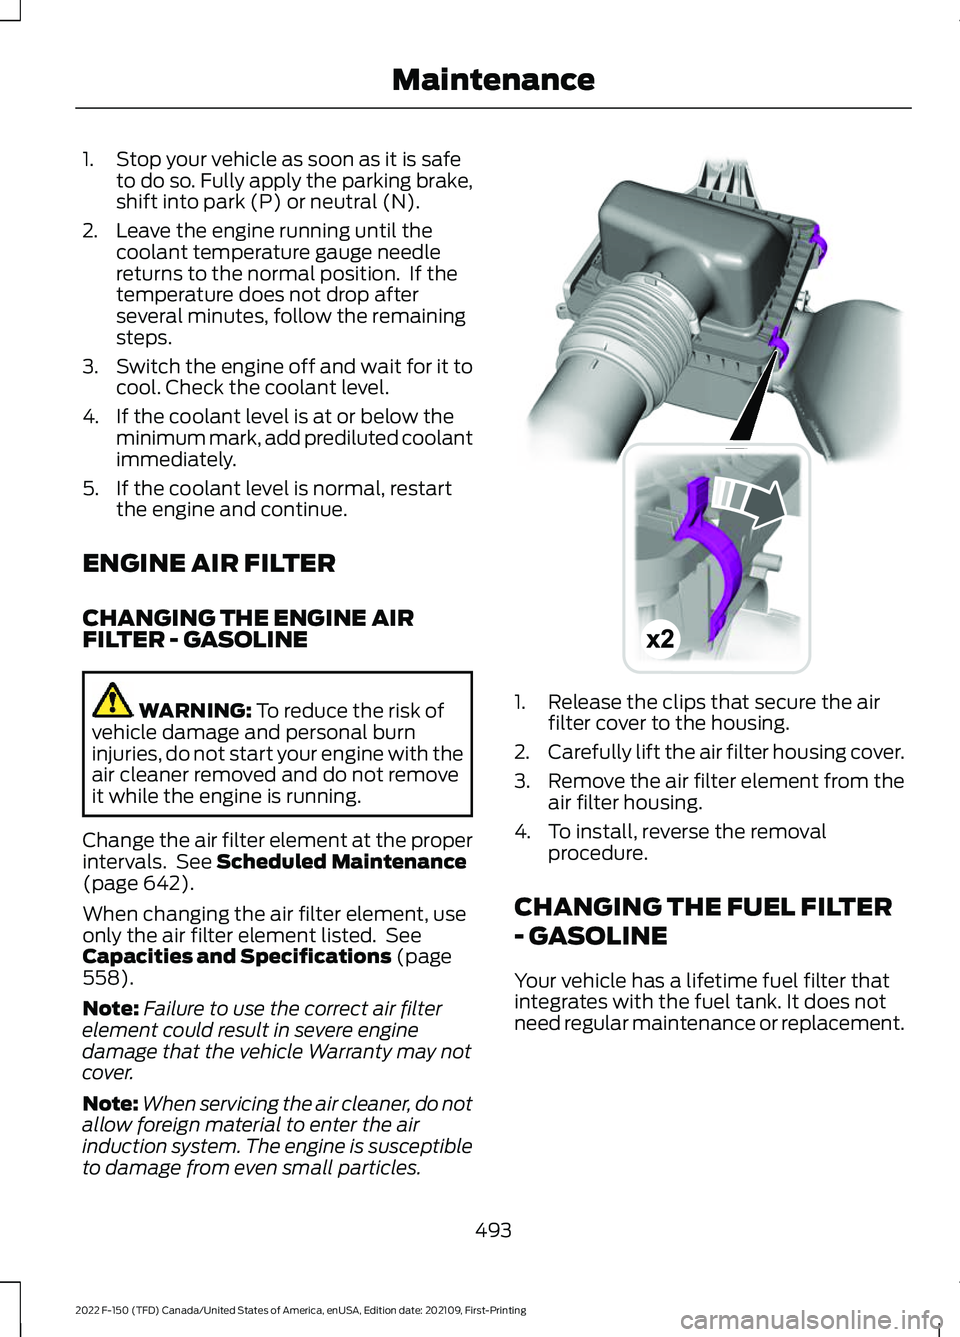 FORD F-150 2022  Owners Manual 1. Stop your vehicle as soon as it is safe
to do so. Fully apply the parking brake,
shift into park (P) or neutral (N).
2. Leave the engine running until the coolant temperature gauge needle
returns t